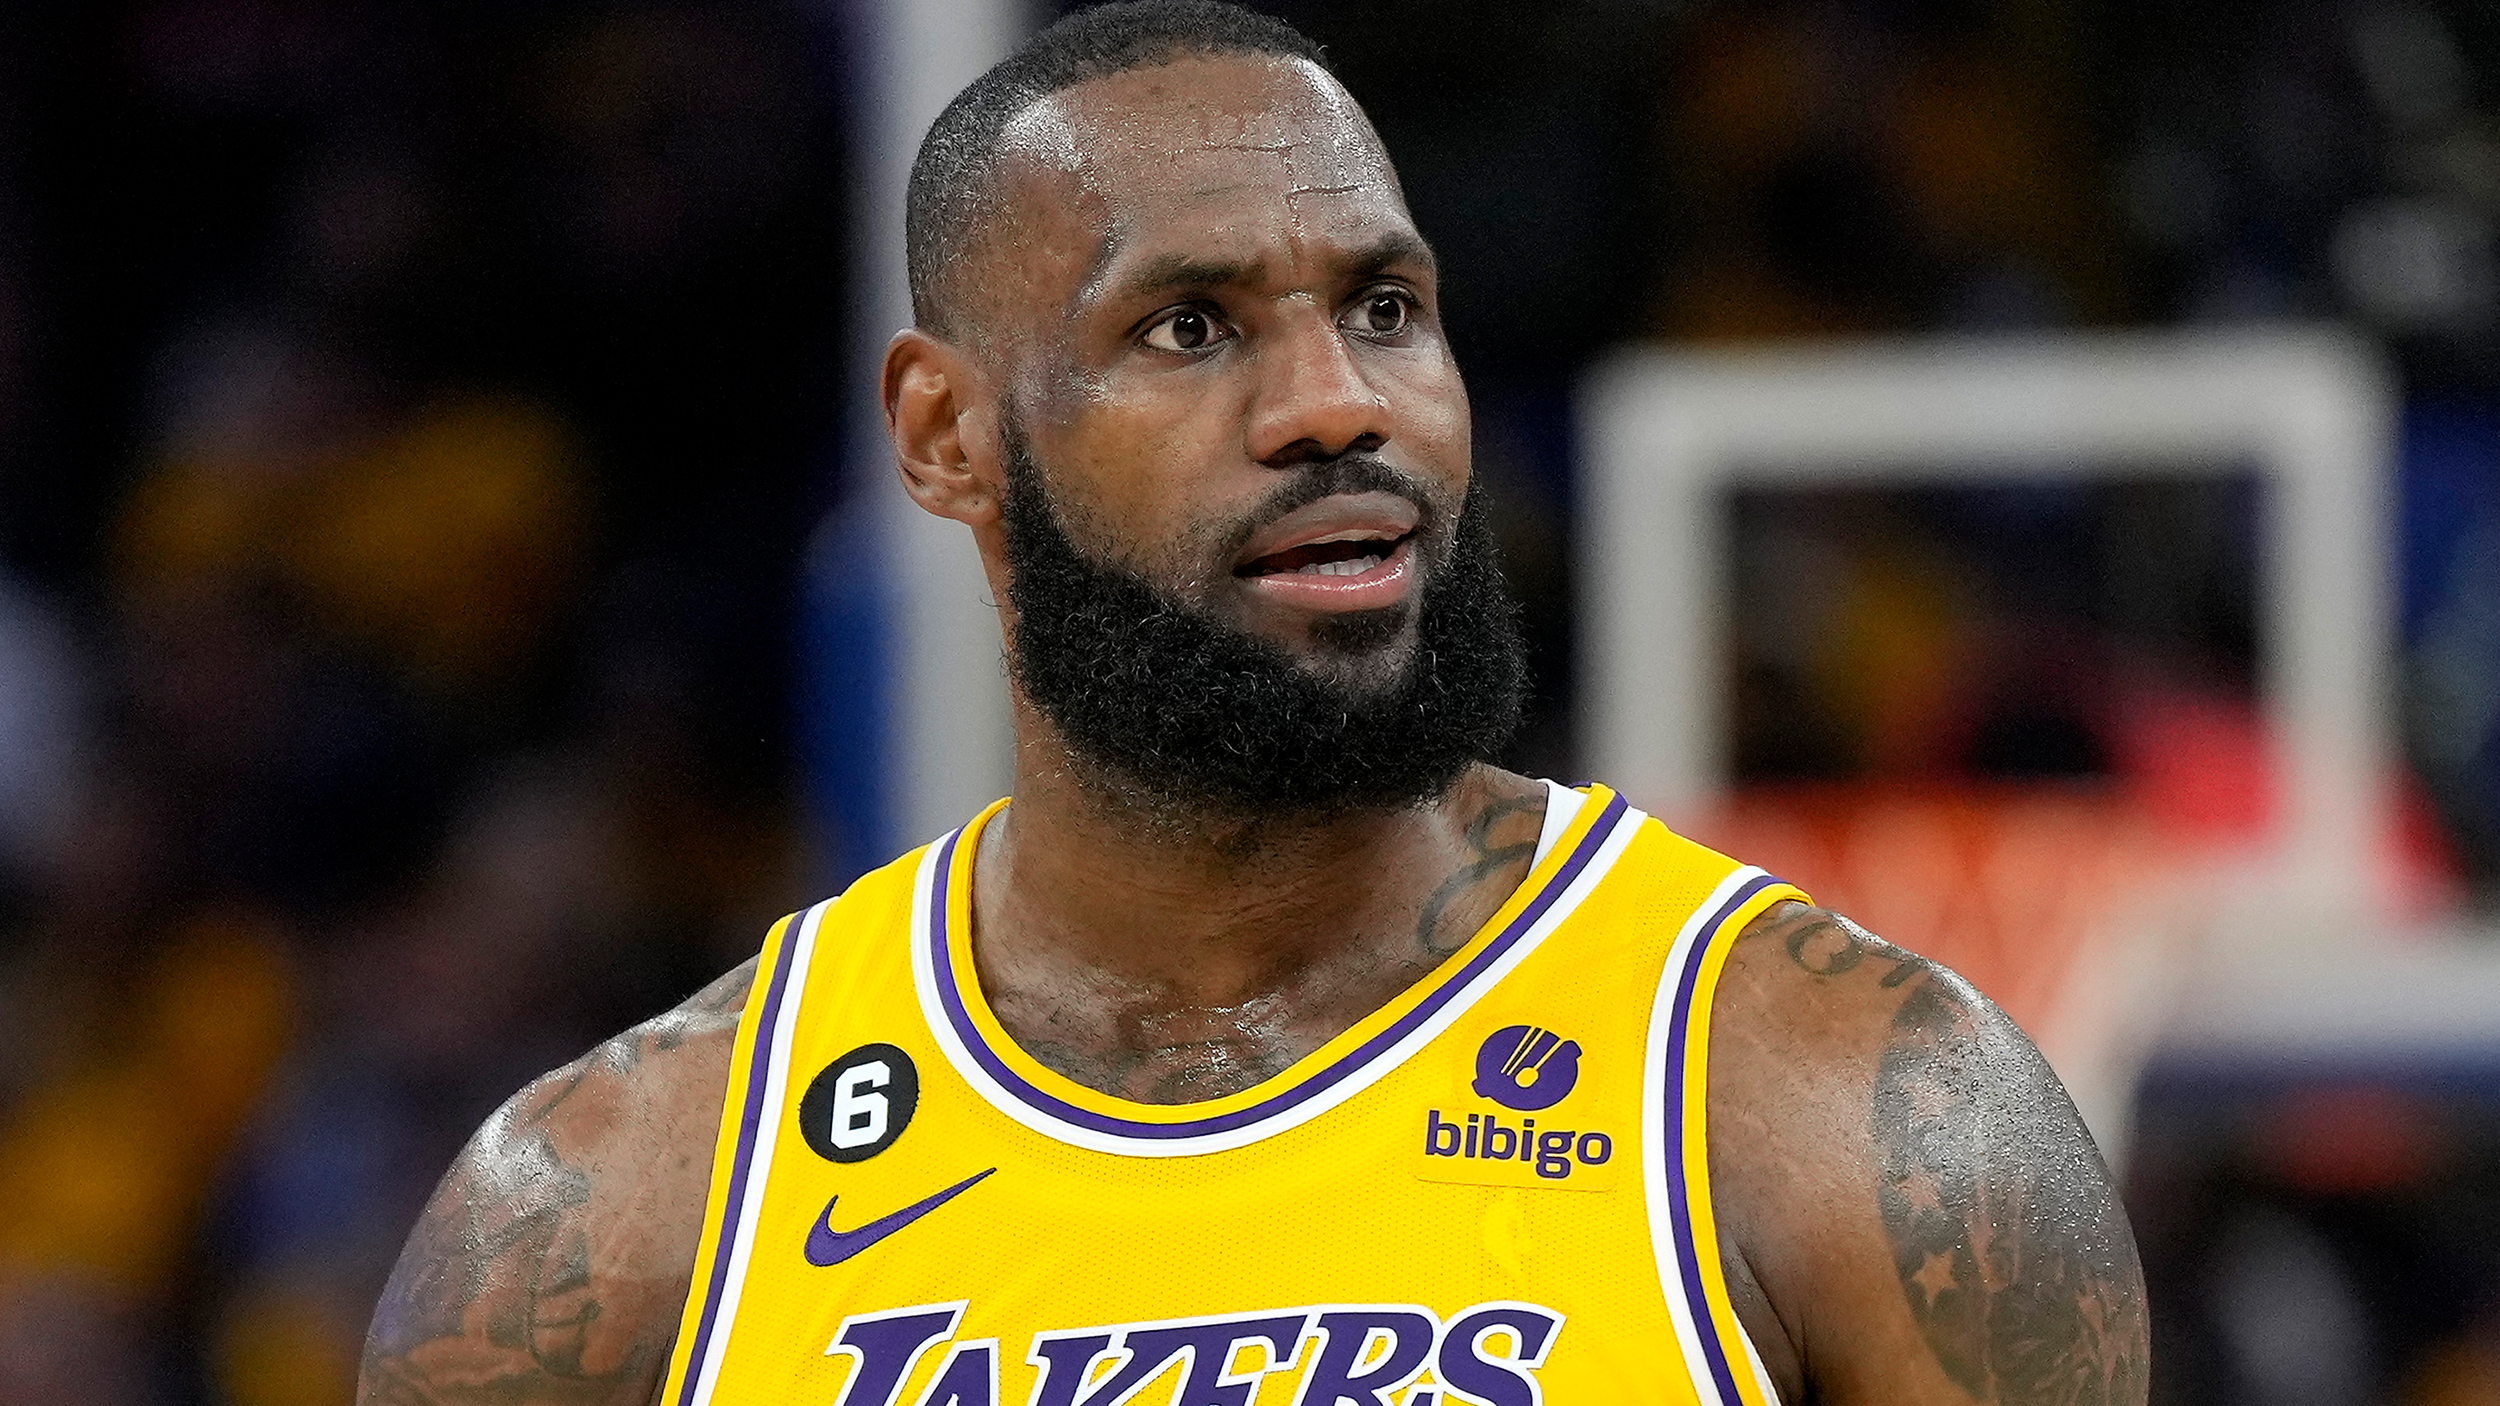 NBA Exec Has Theory About LeBron James Teasing Retirement